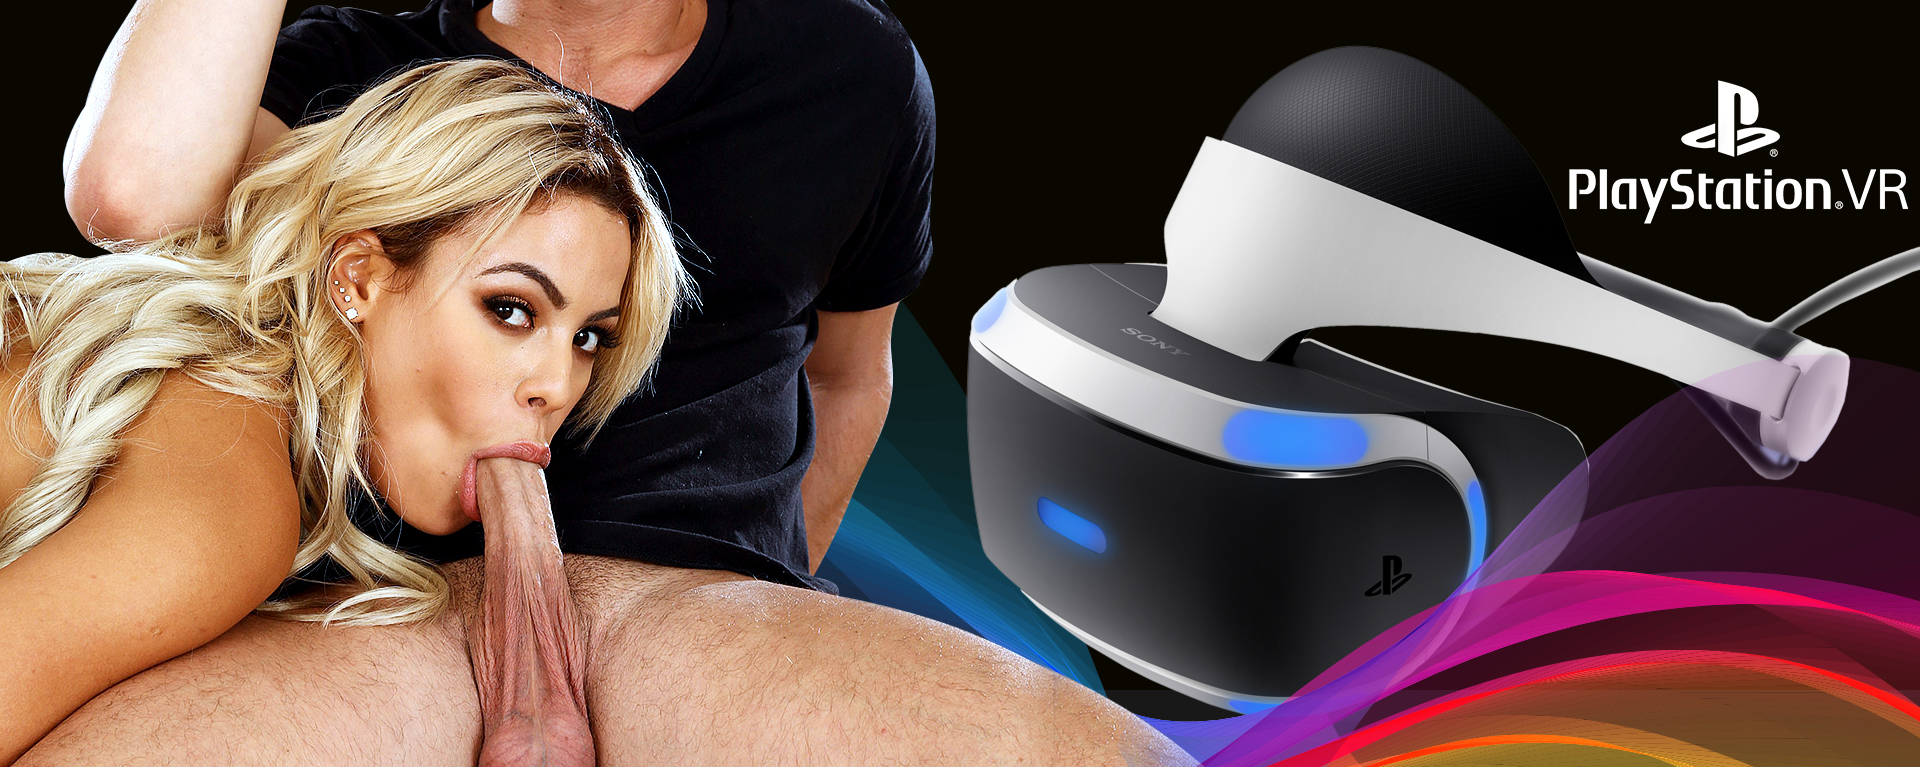 christine fancy recommends playstation vr porn game pic